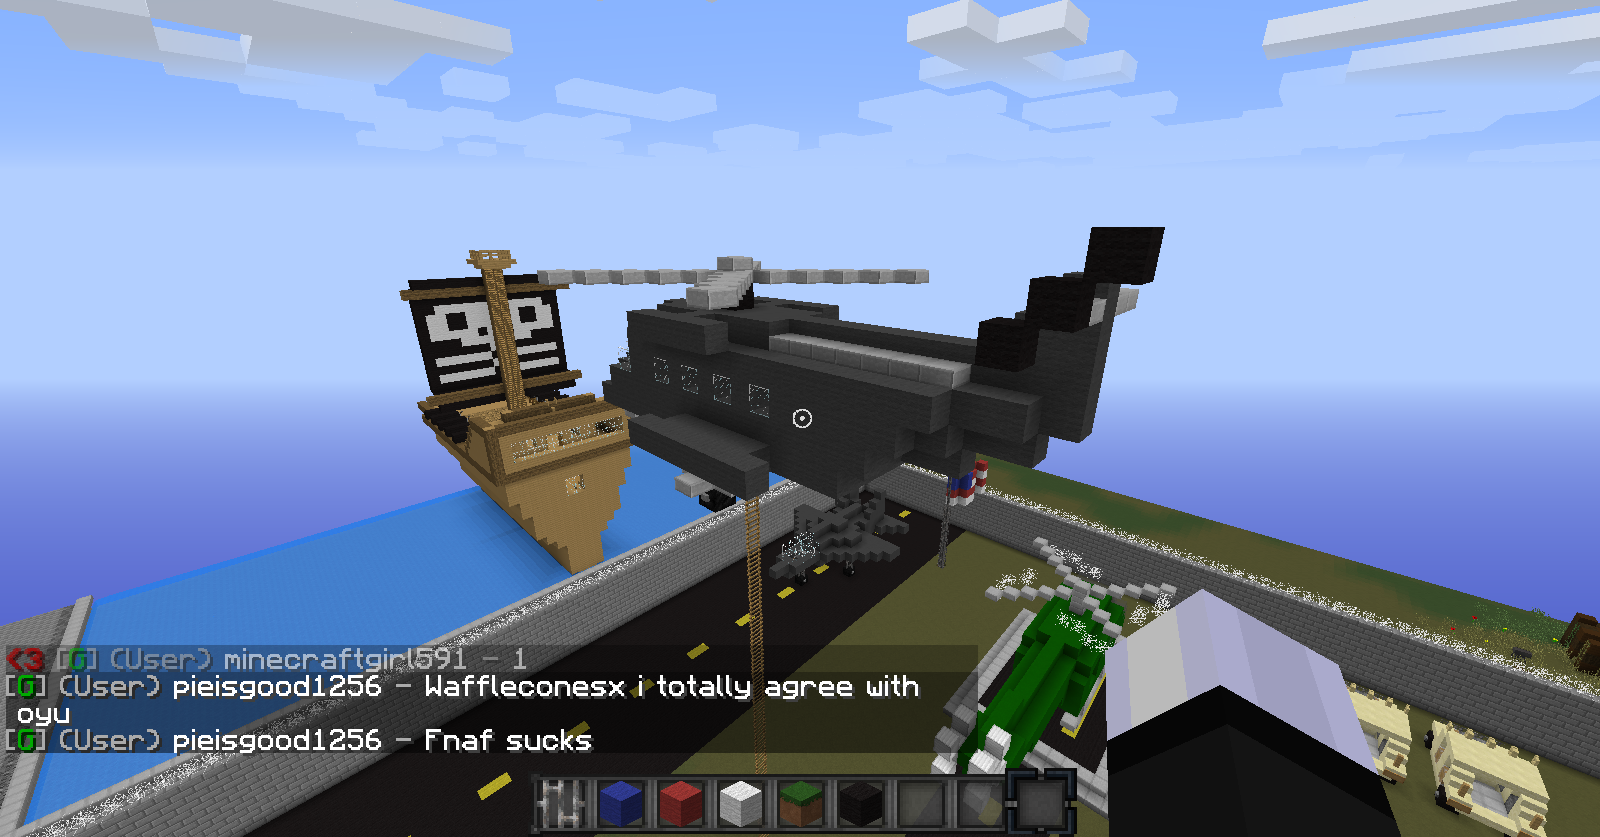 Minecraft military base with vehicles - mozquad